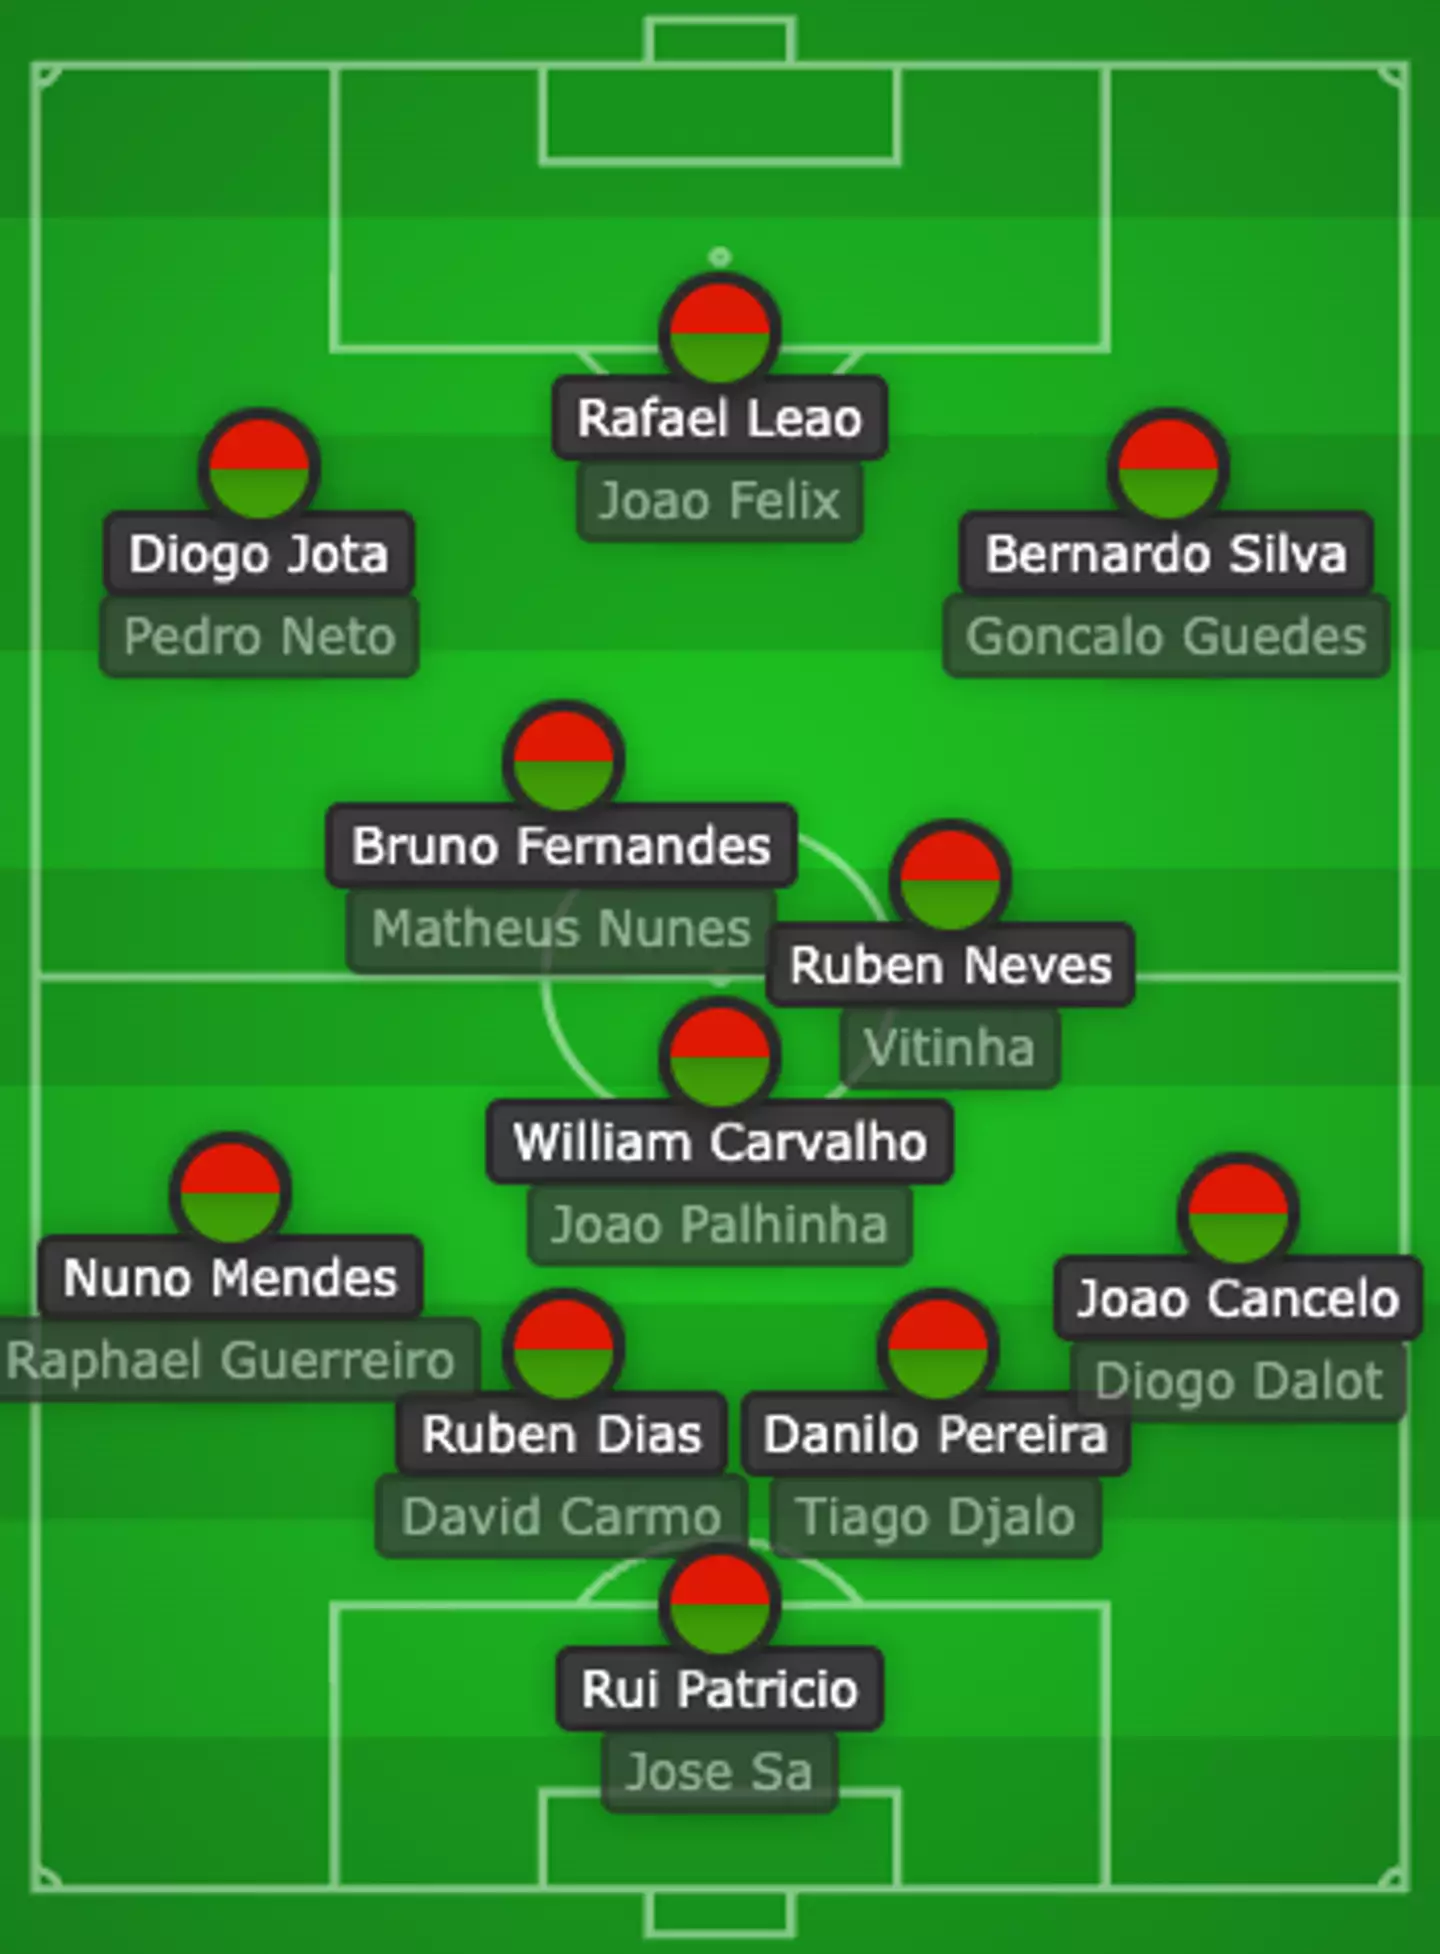 A potential Portugal team without Ronaldo. (Image